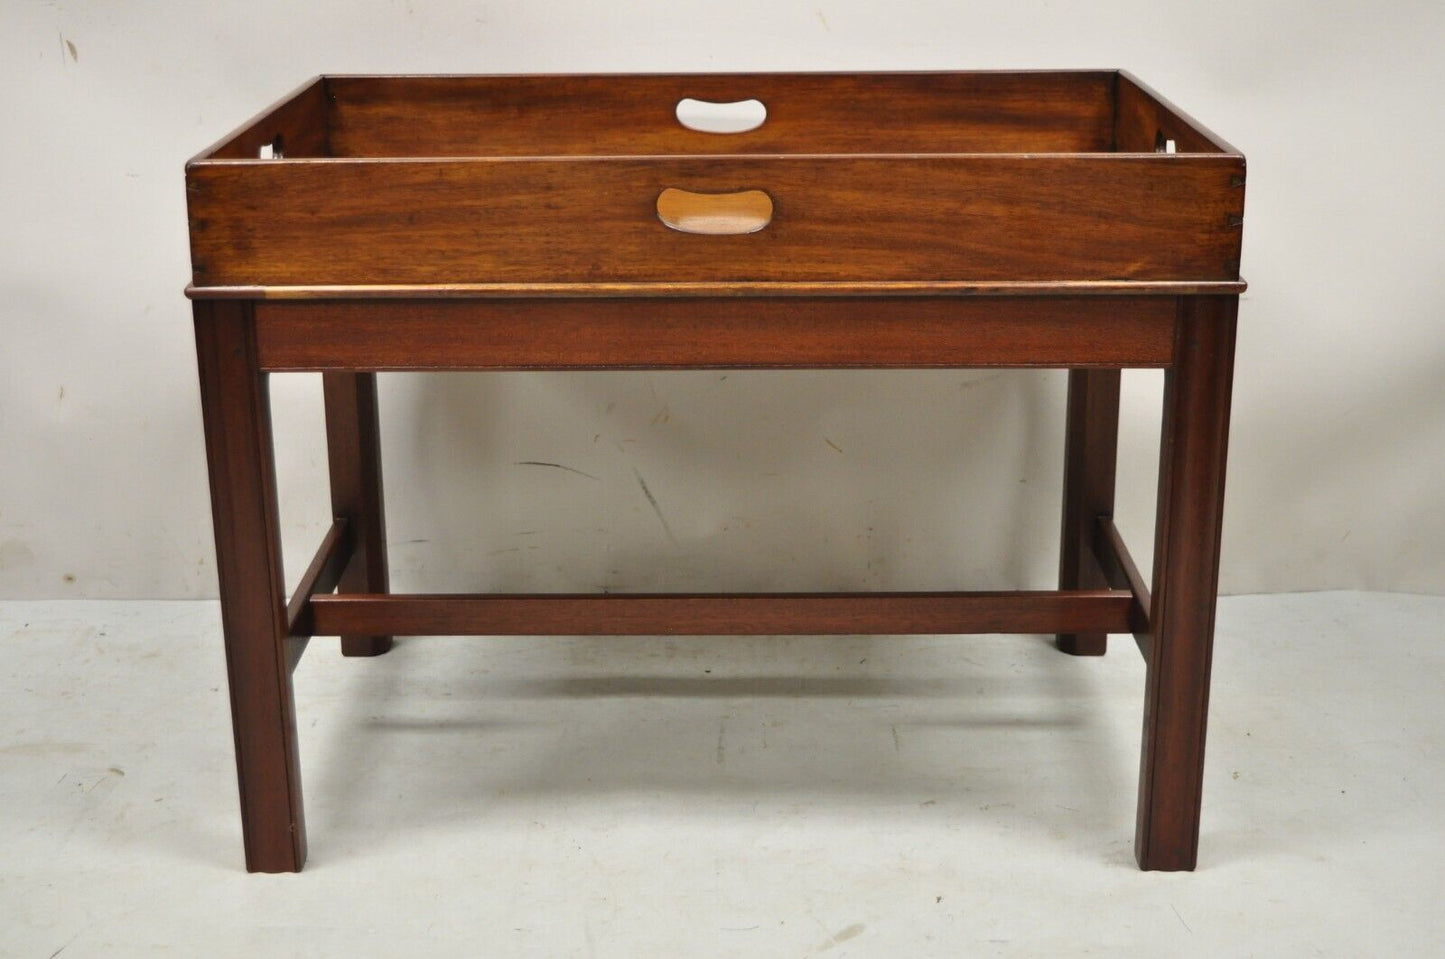 Antique English Georgian Mahogany Butler's Style Coffee Table with Dovetail